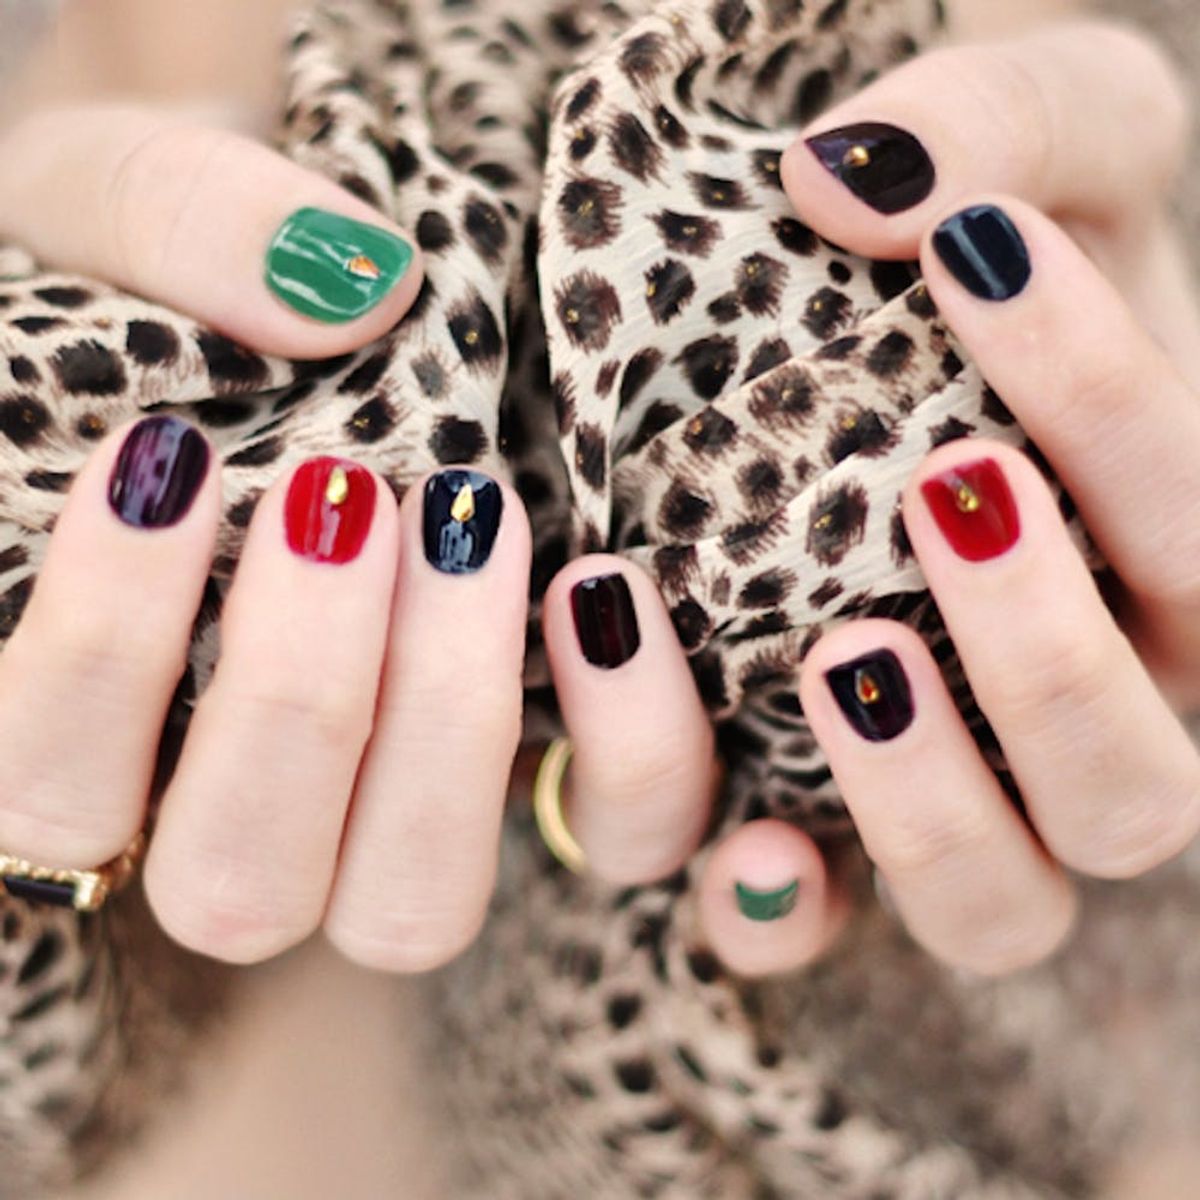 15 Nail Designs You’ll Love for Fall